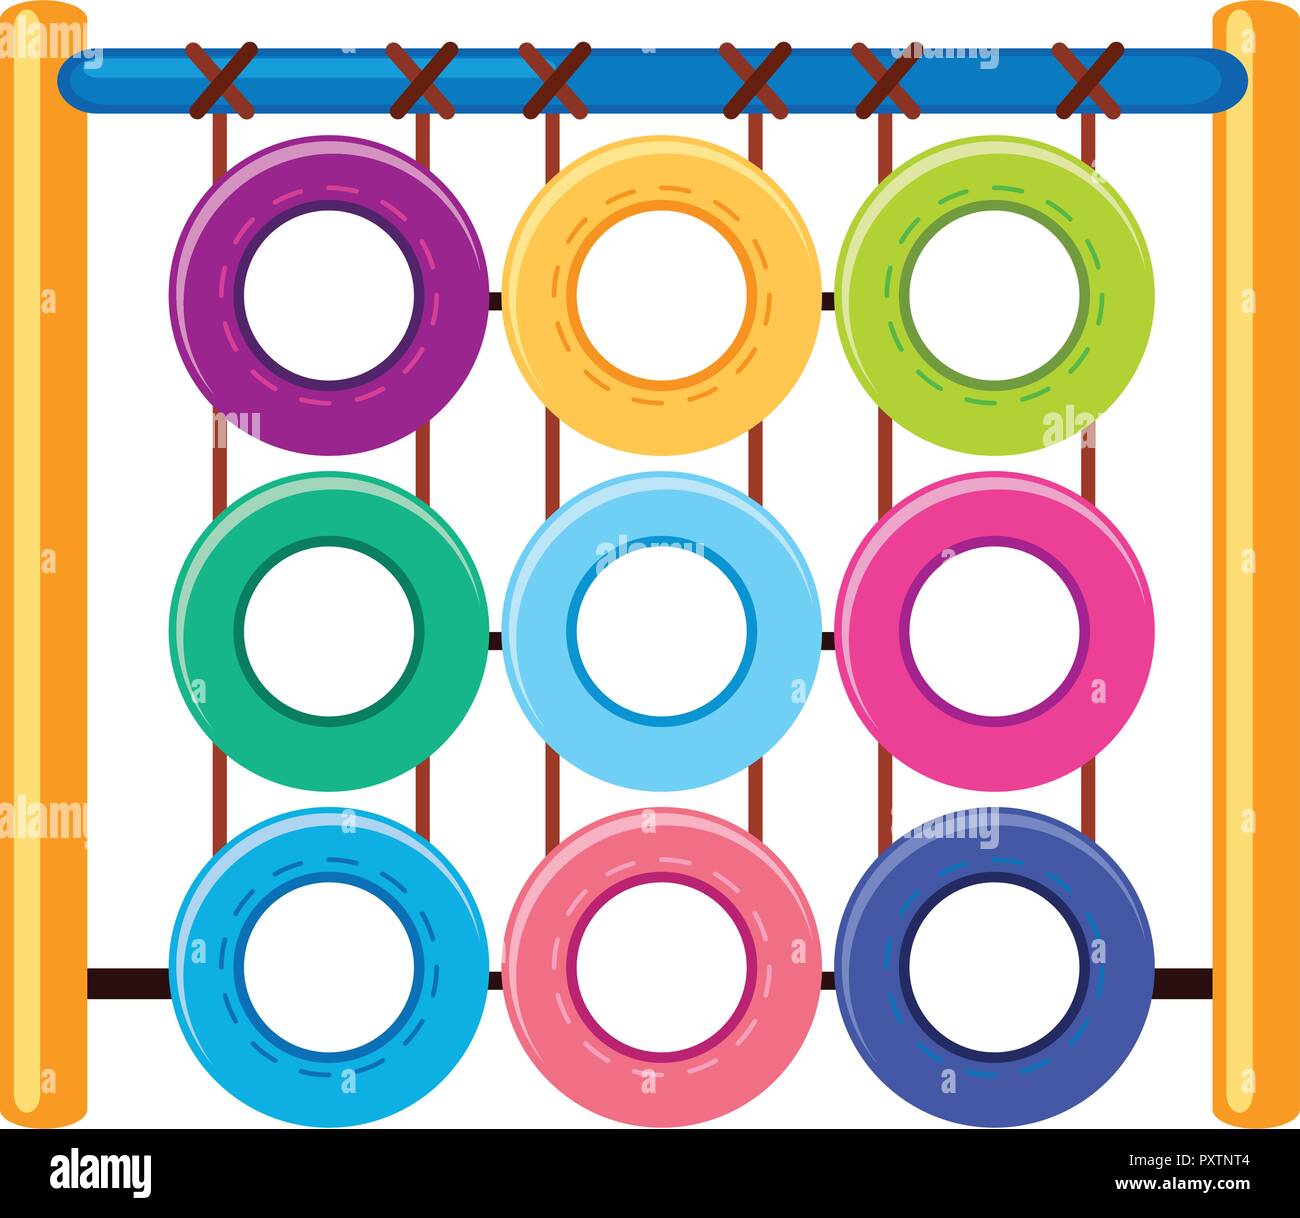 Climbing station with different color rings illustration Stock Vector